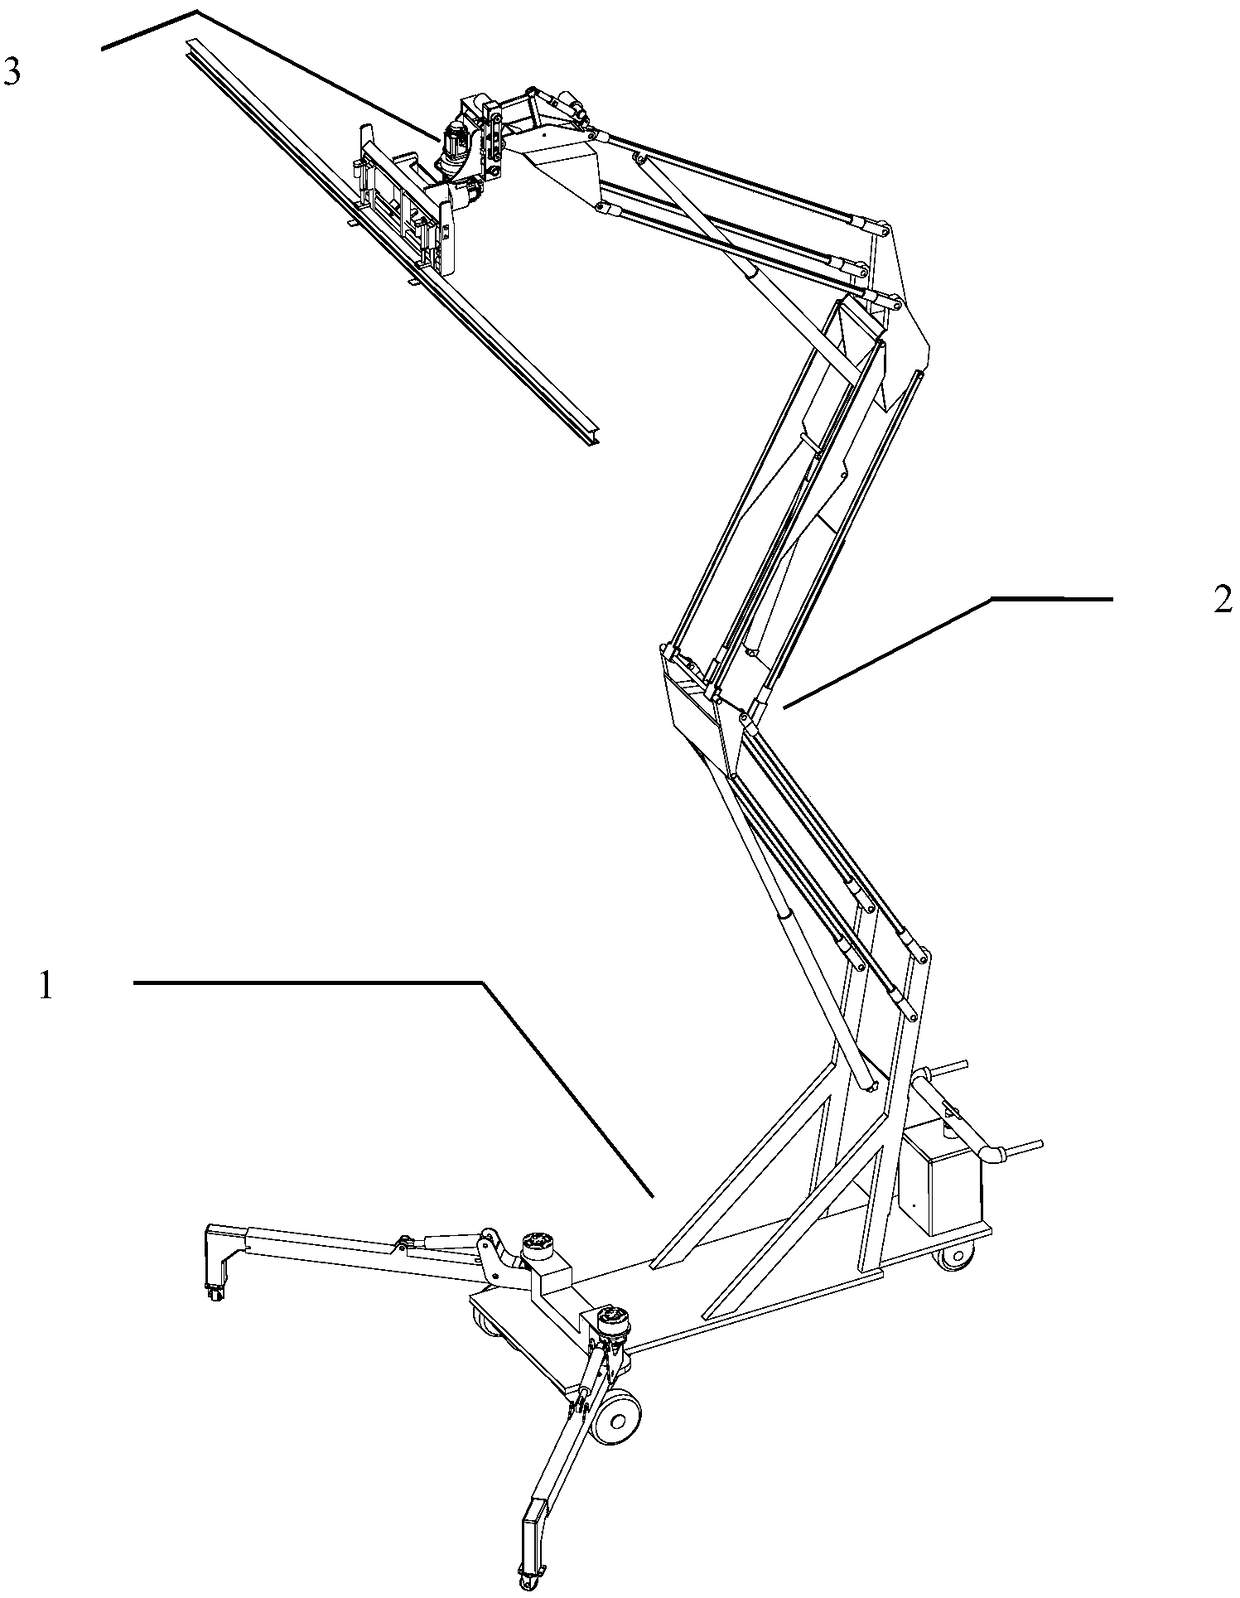 Mechanical structure of indoor building profile installation robot